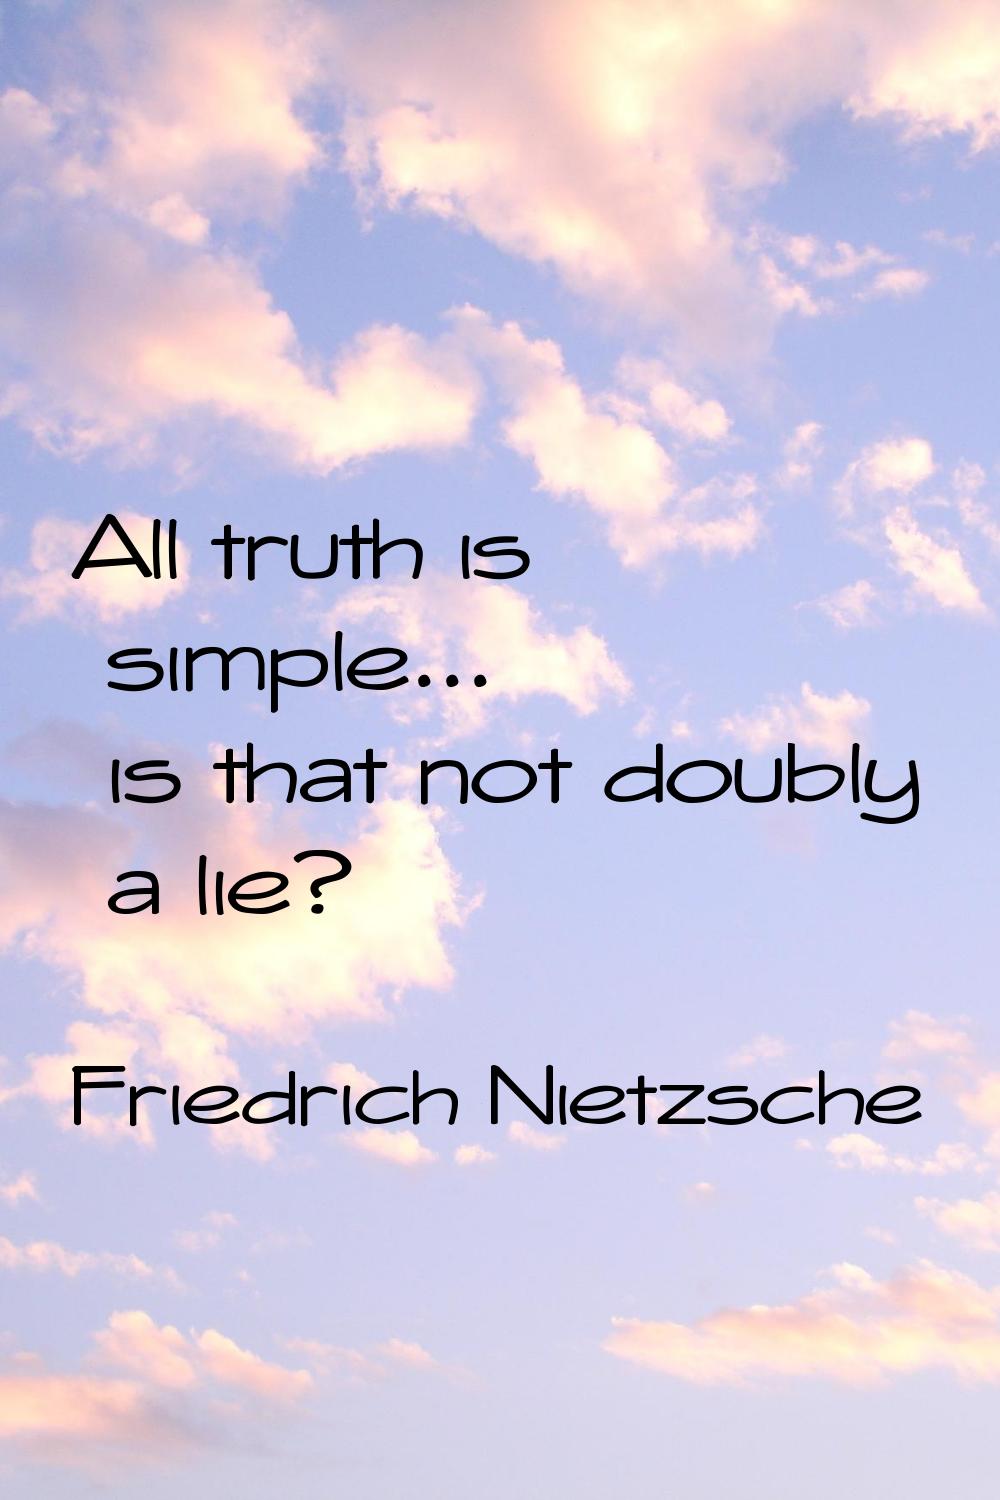 All truth is simple... is that not doubly a lie?